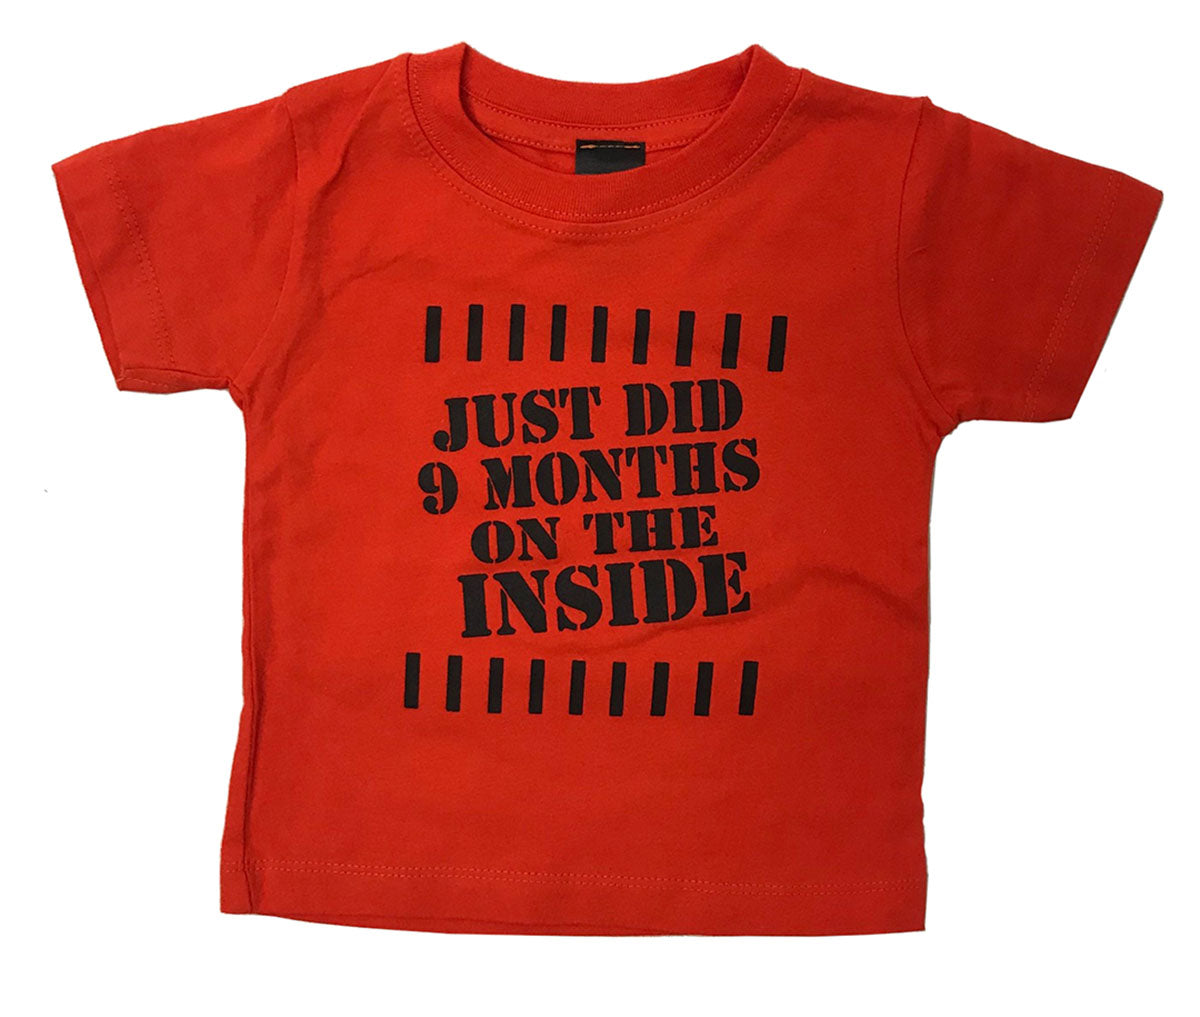 JUST DID 9 MONTHS ON THE INSIDE BABY T SHIRT - Trailsclothing.com